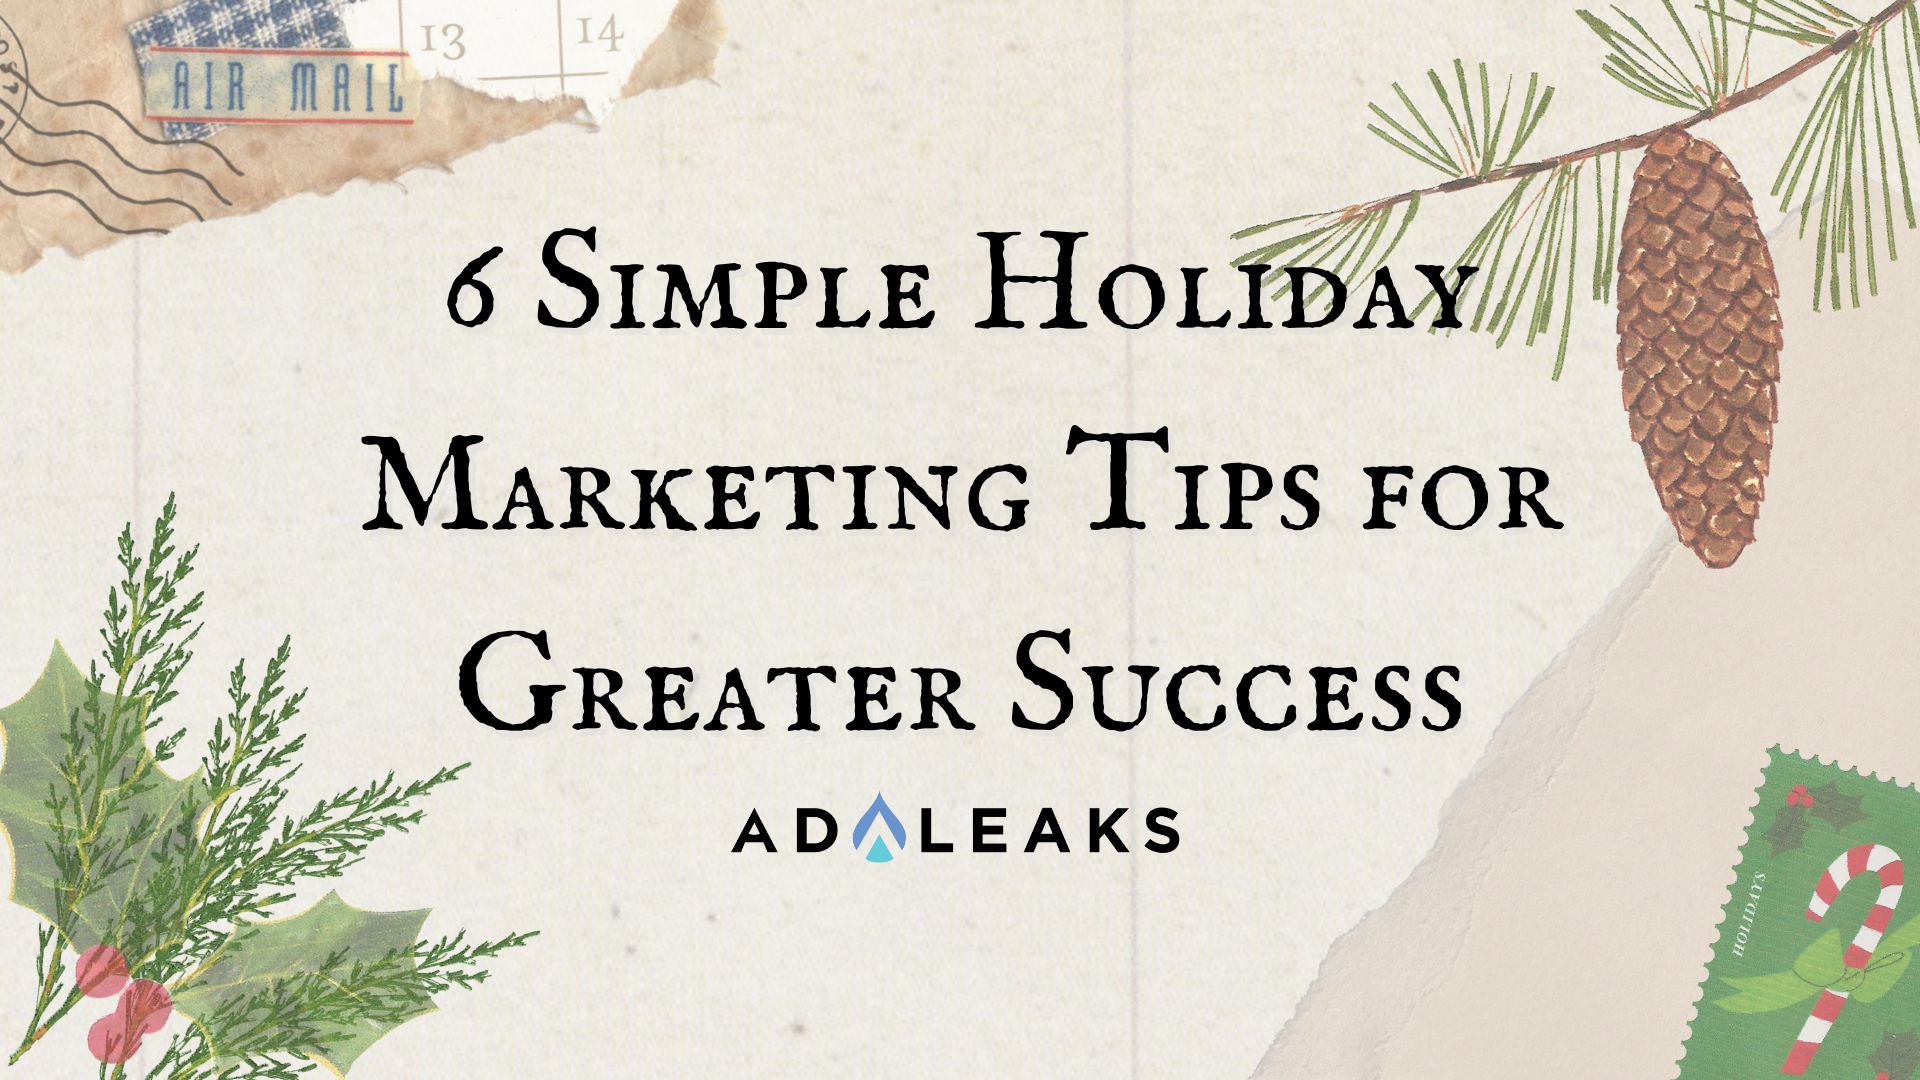 6 simple holiday marketing tips for greater success